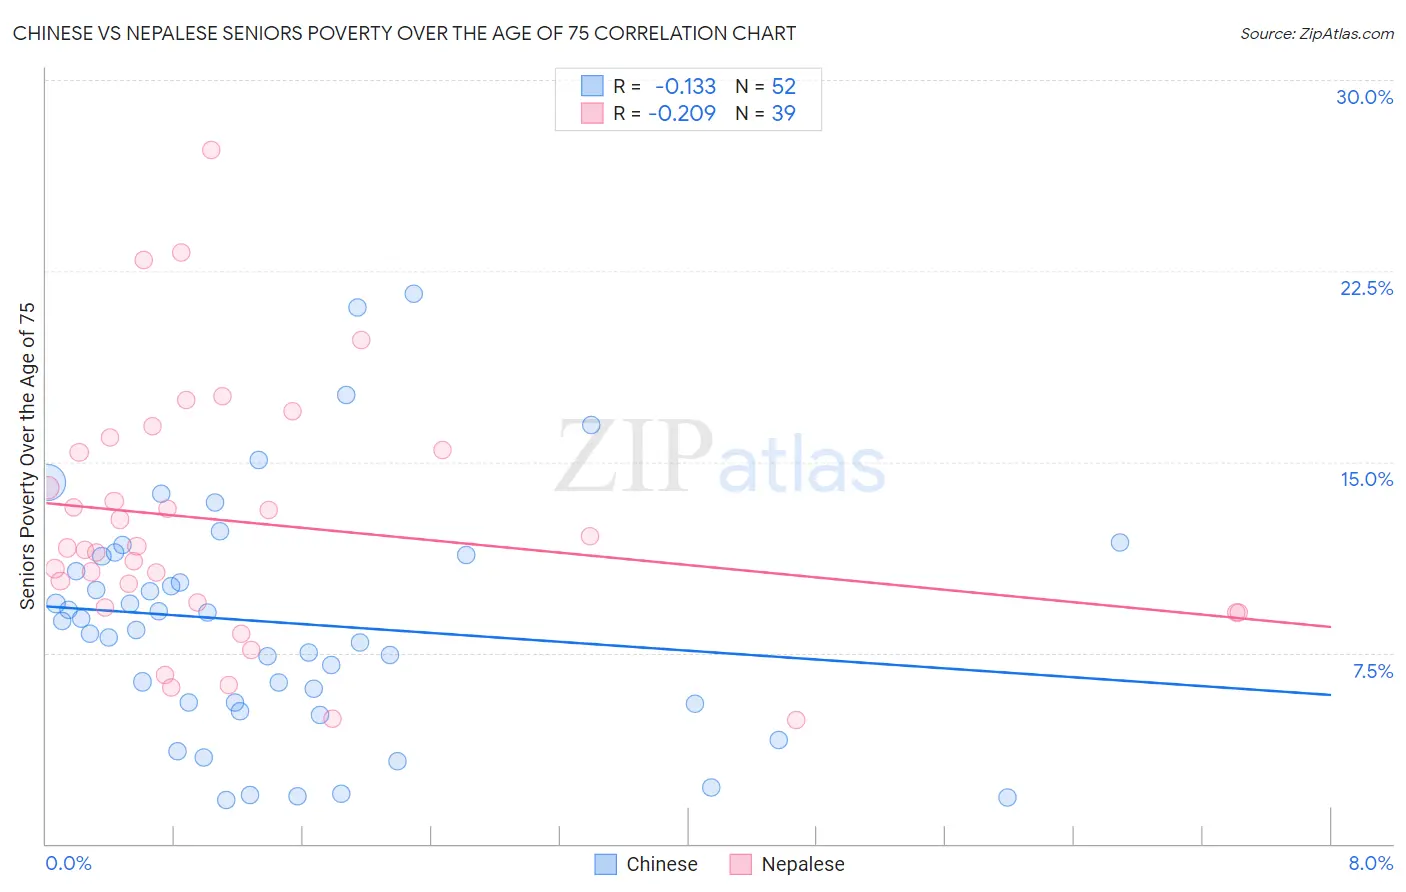 Chinese vs Nepalese Seniors Poverty Over the Age of 75